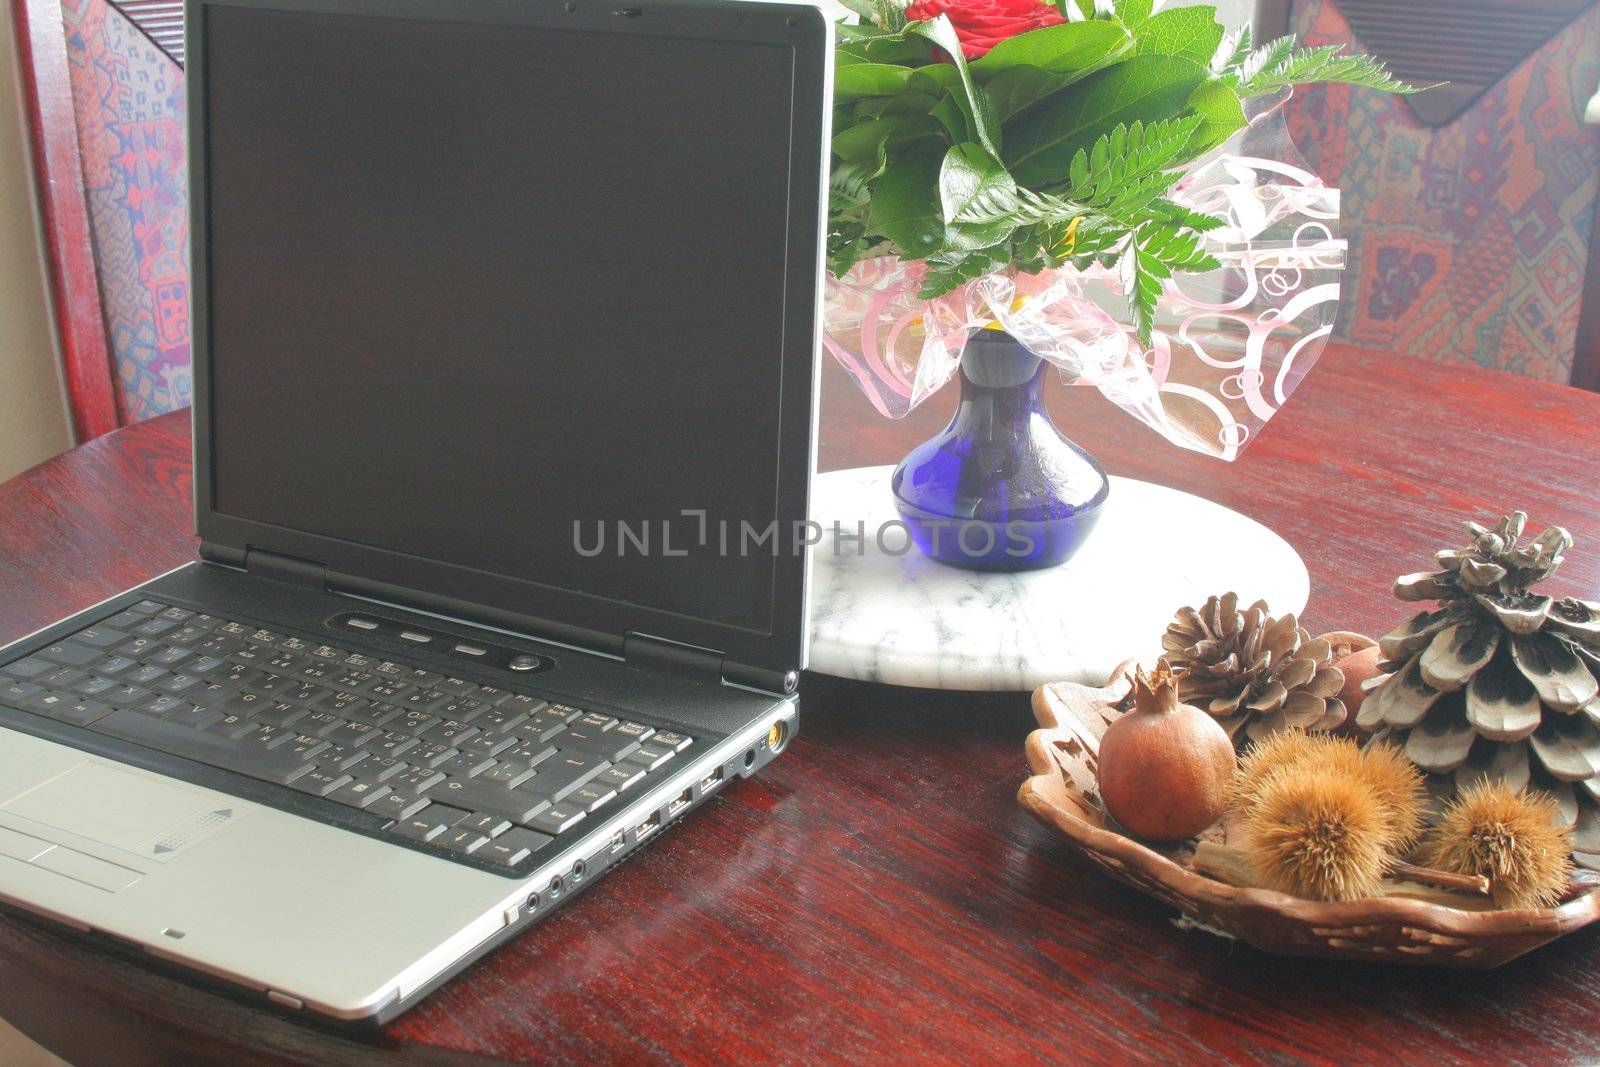 laptop on the table with flowers